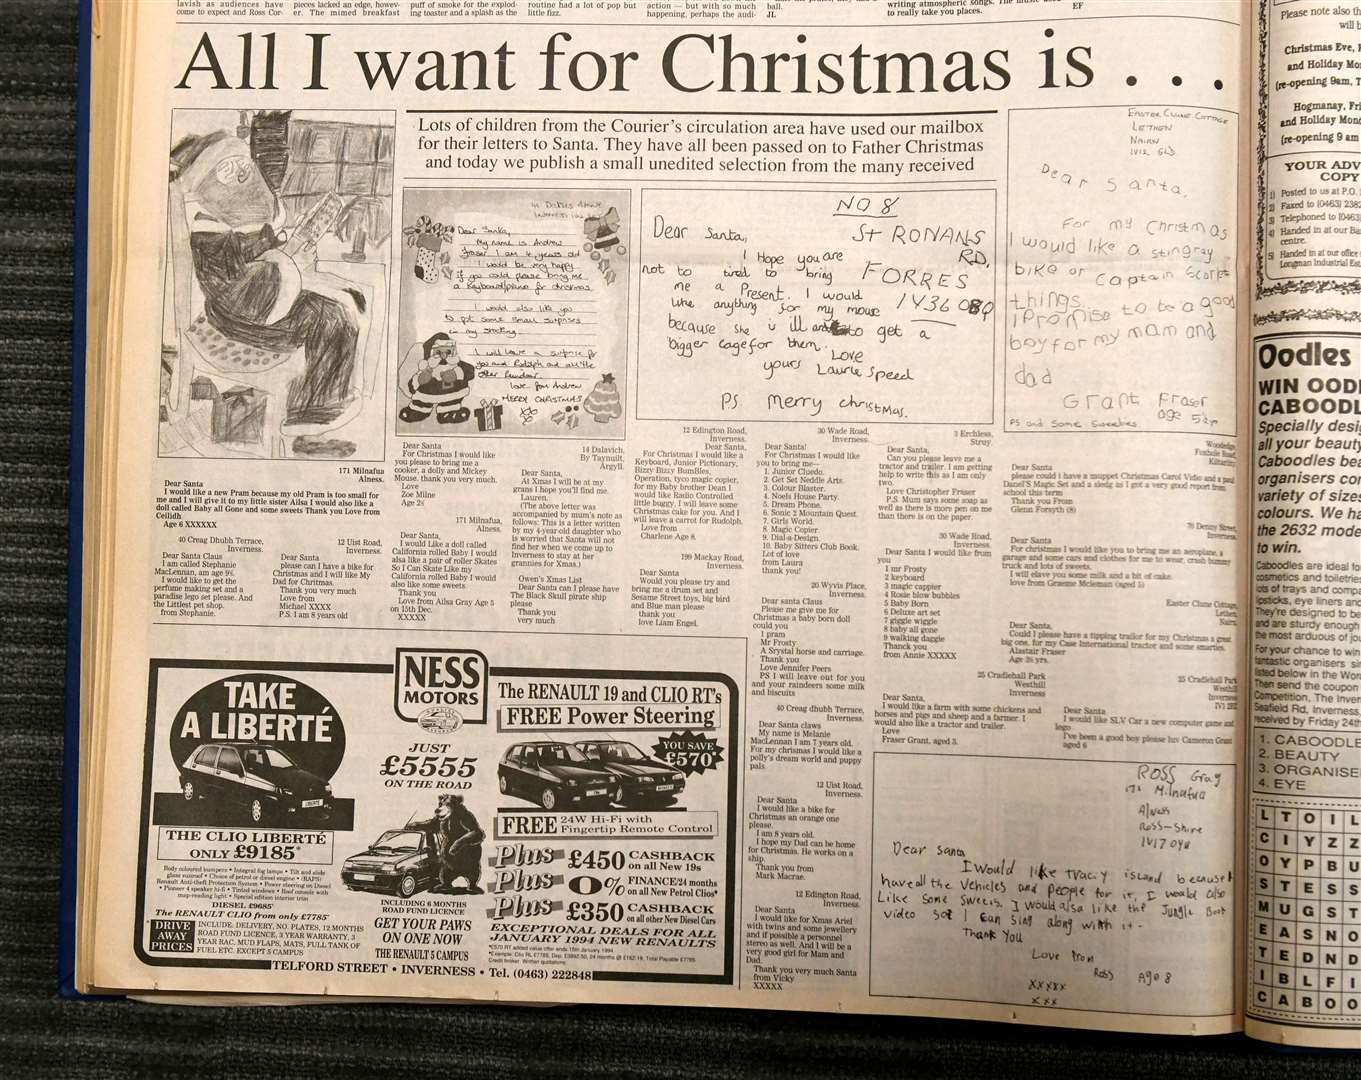 Youngsters reveal their wish lists for Christmas 1993.